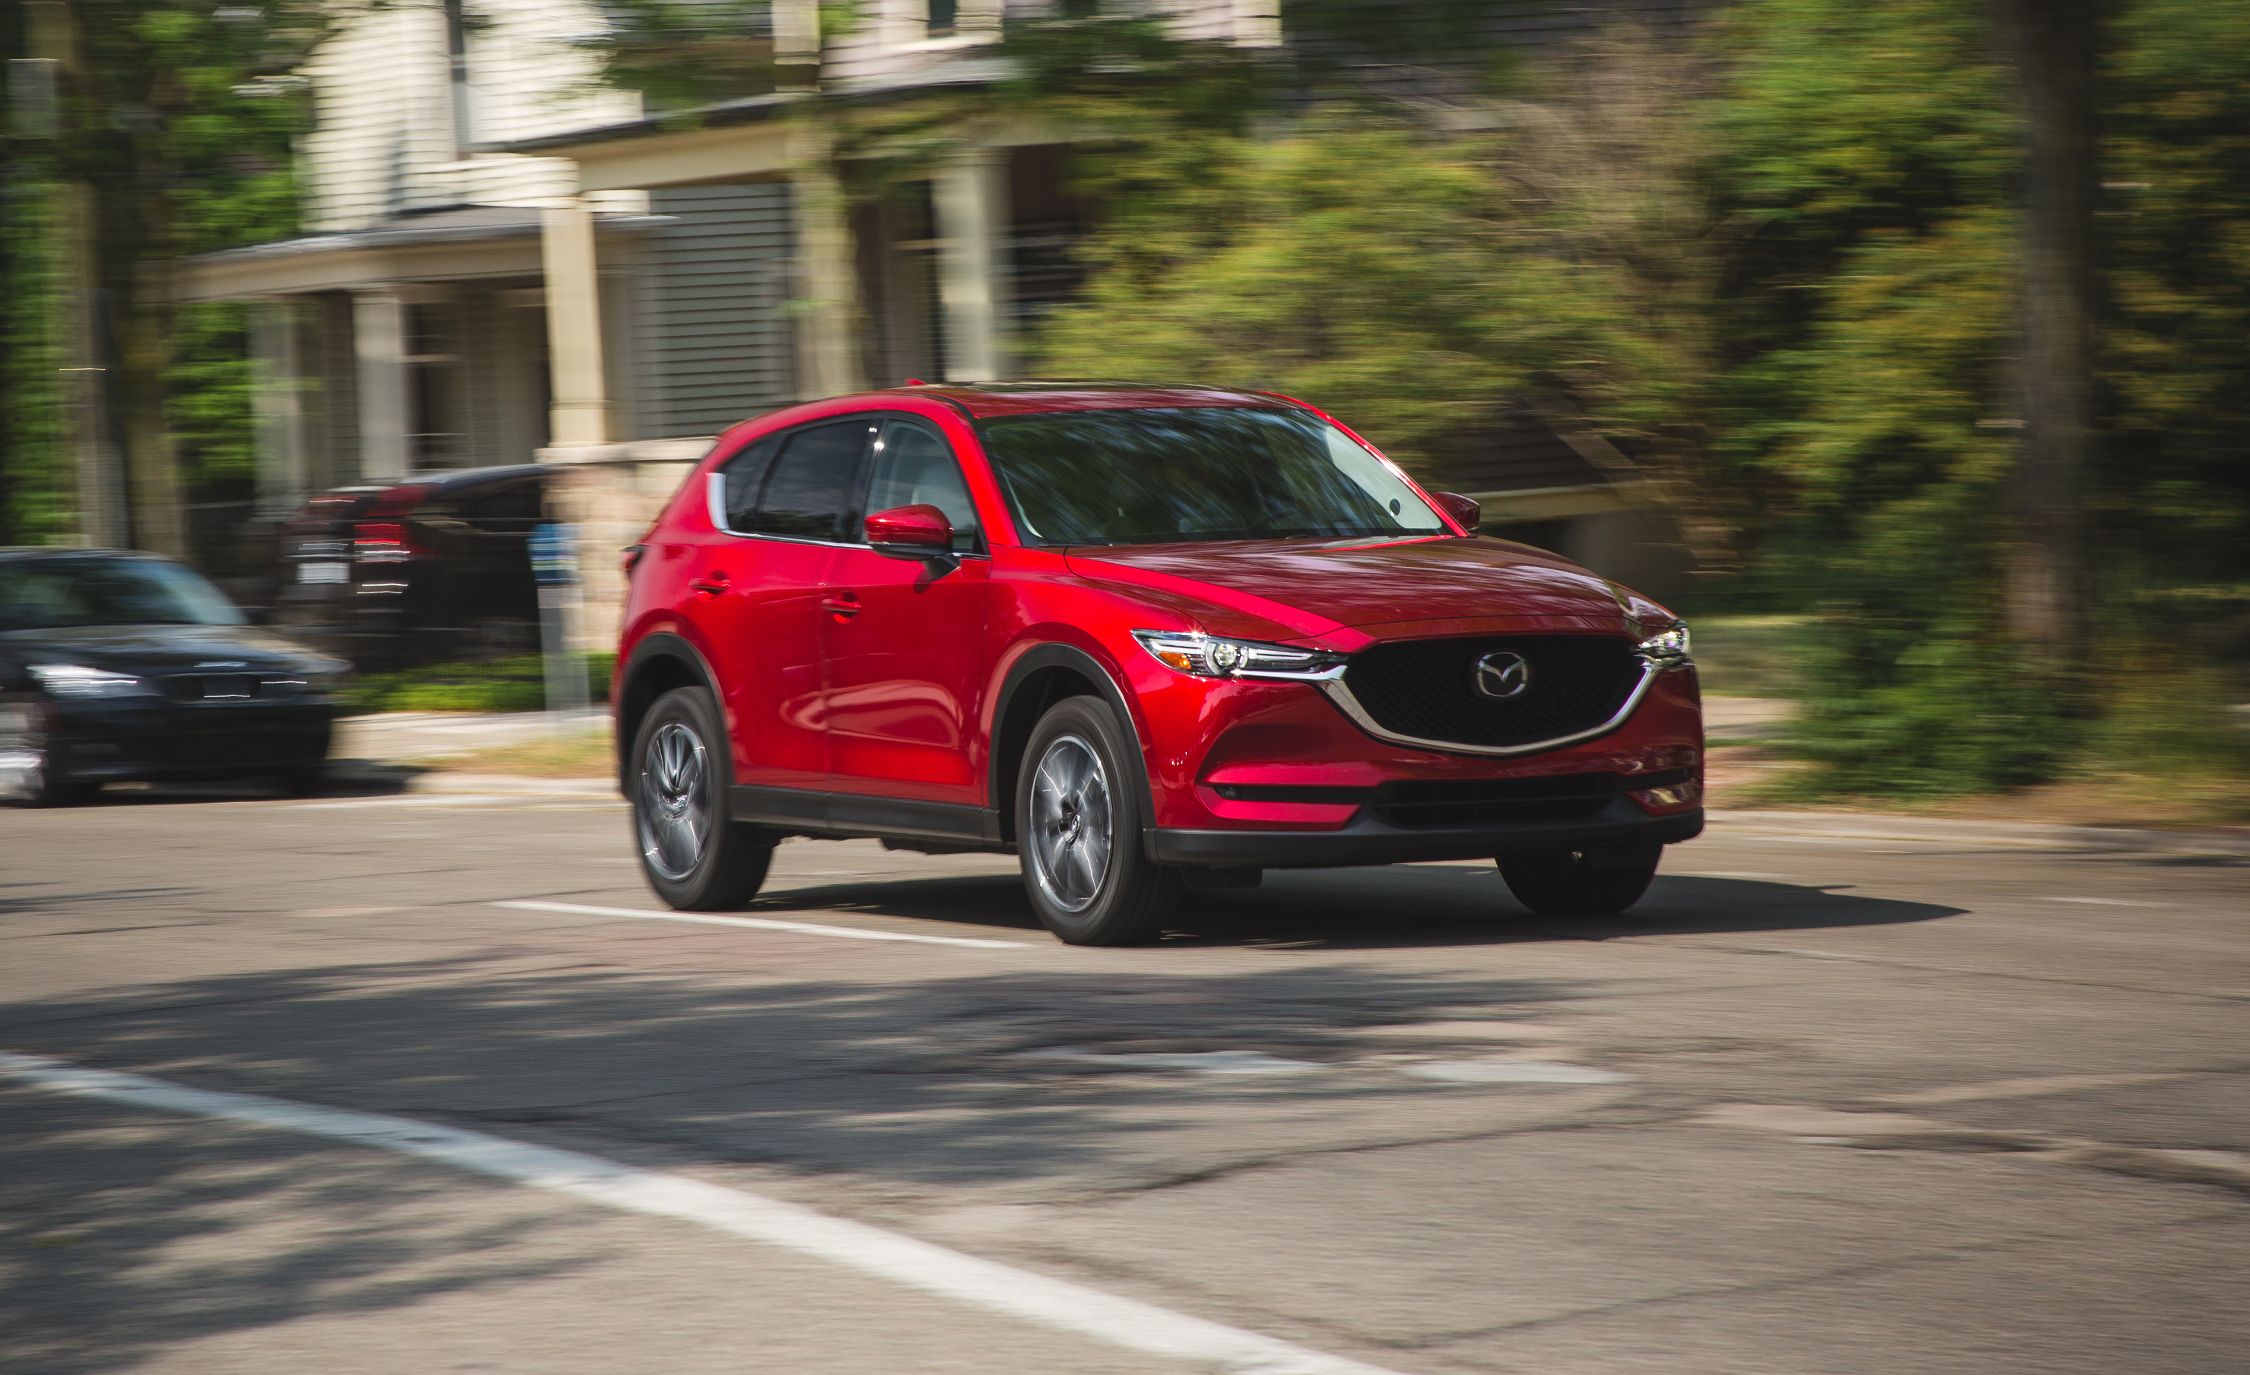 https://hips.hearstapps.com/hmg-prod/amv-prod-cad-assets/images/17q3/685270/2017-mazda-cx-5-awd-instrumented-test-review-car-and-driver-photo-685352-s-original.jpg